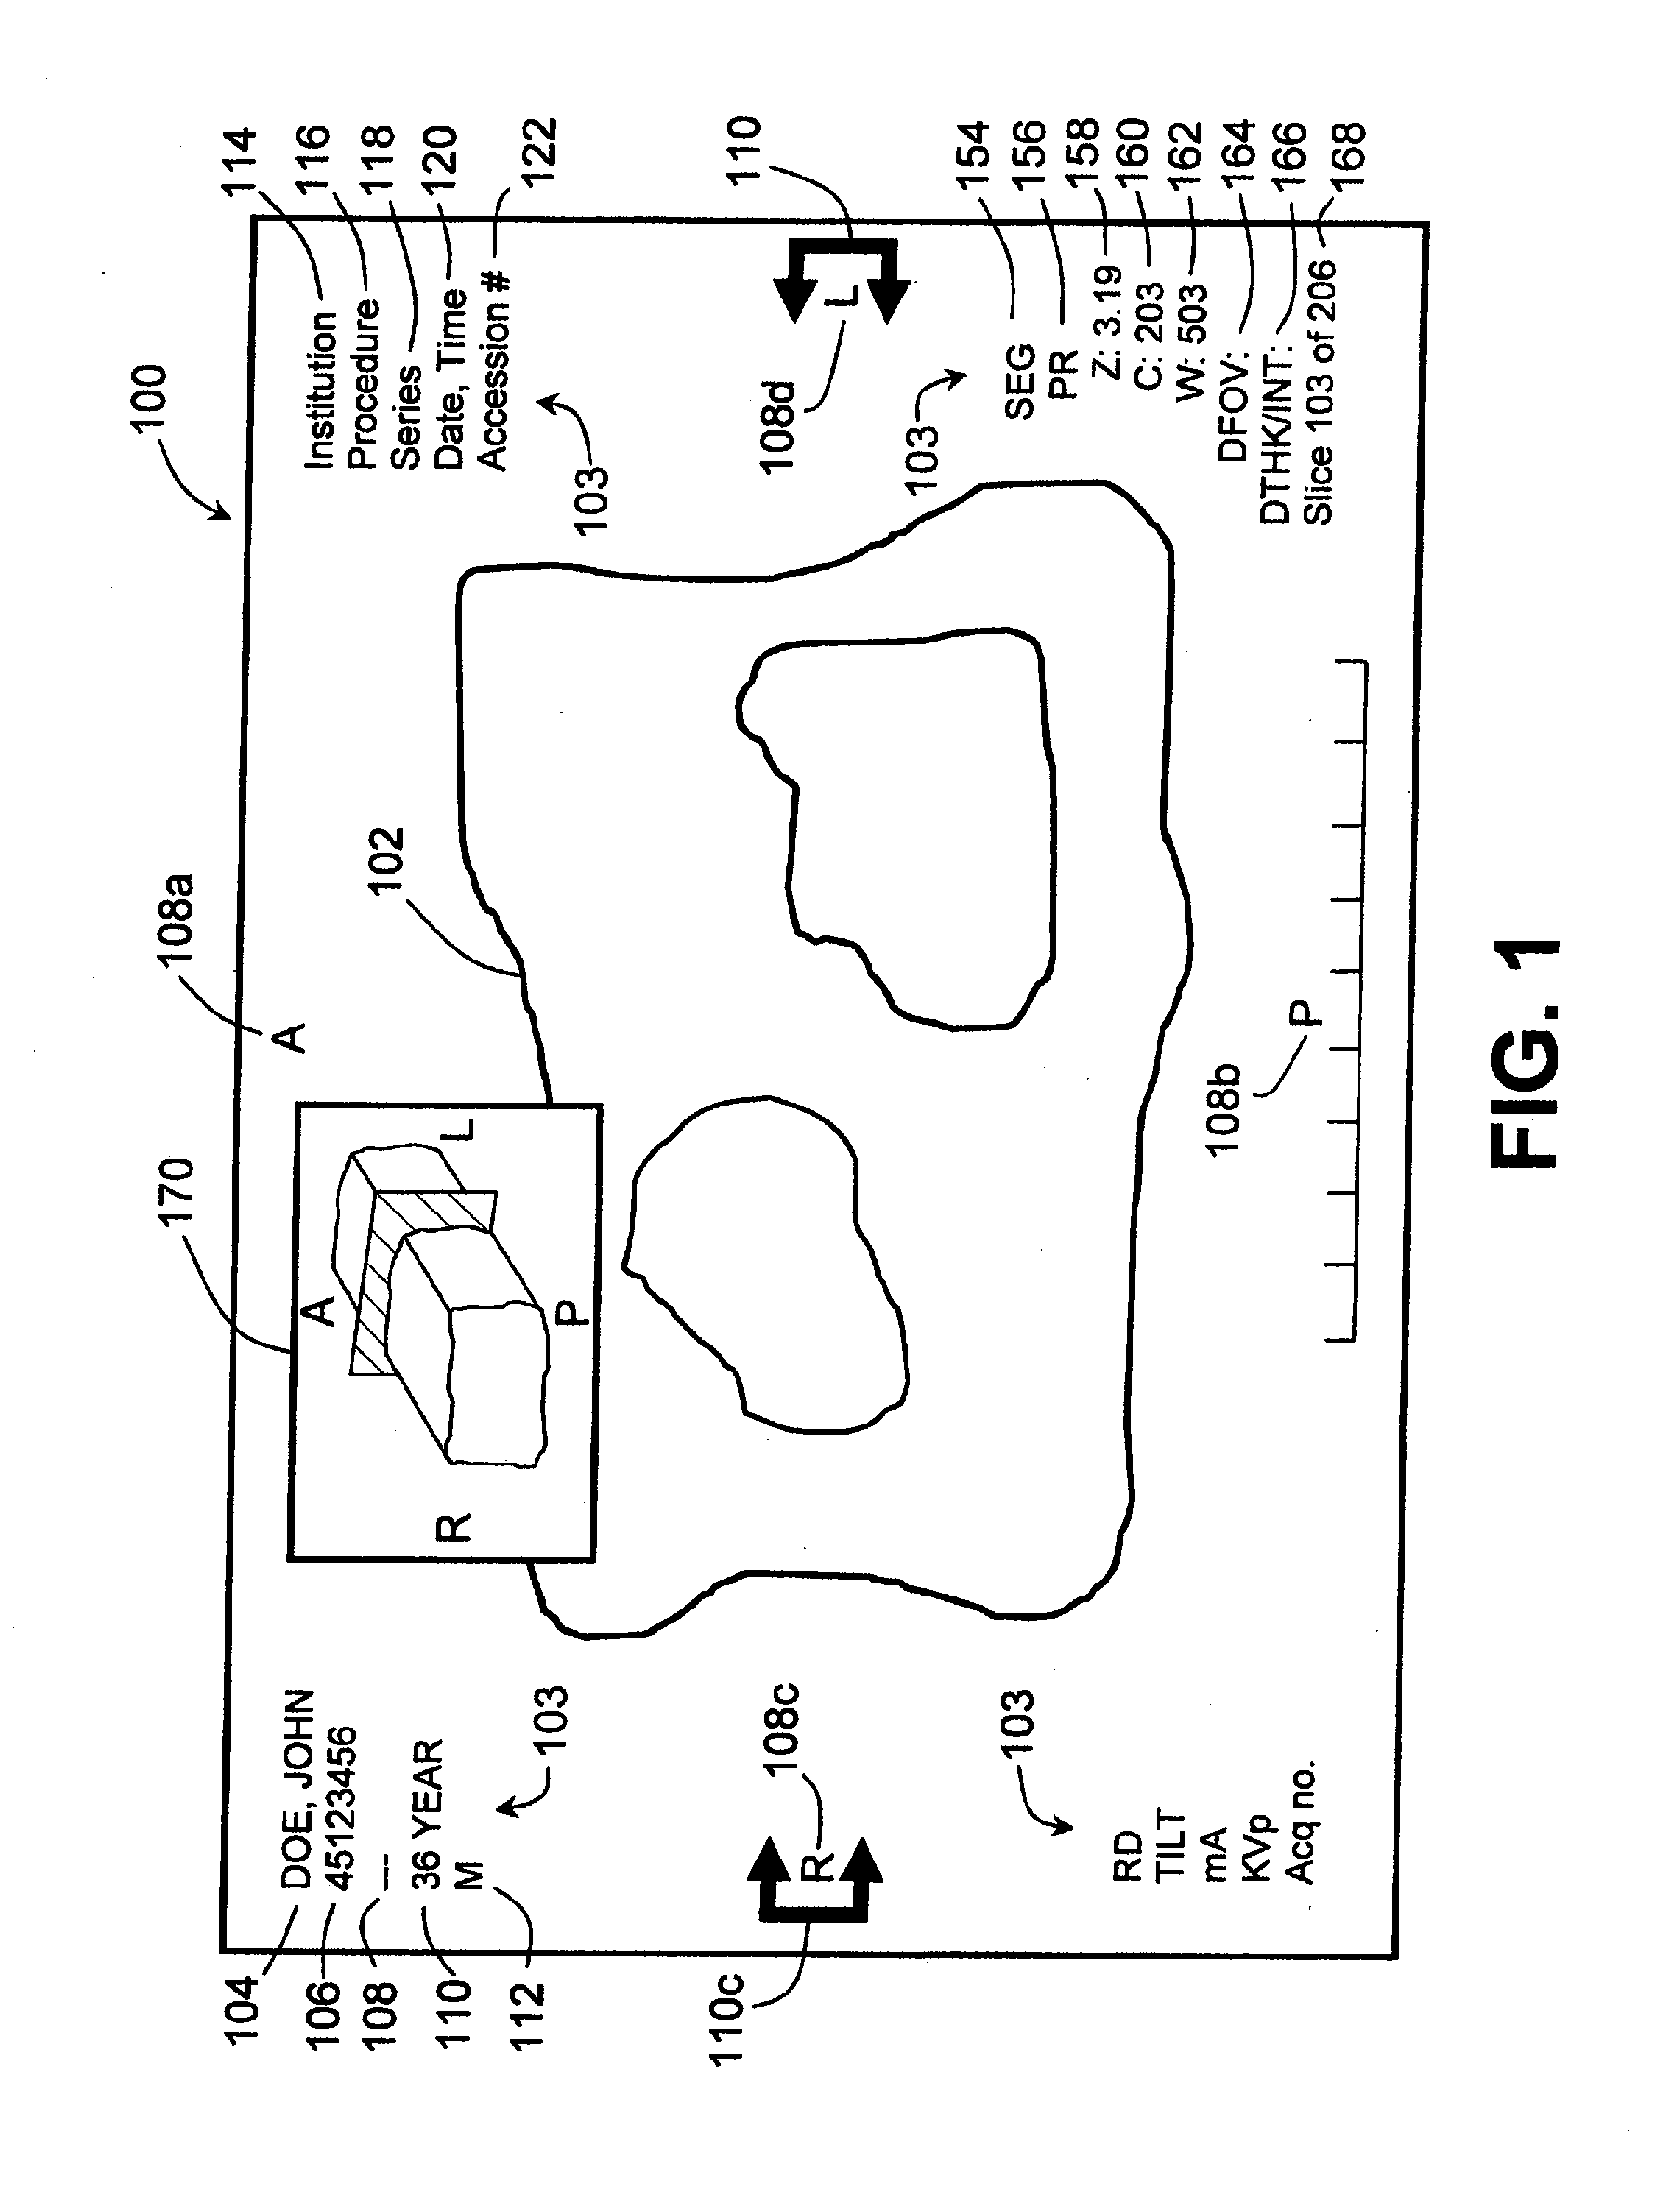 Active Overlay System and Method for Accessing and Manipulating Imaging Displays